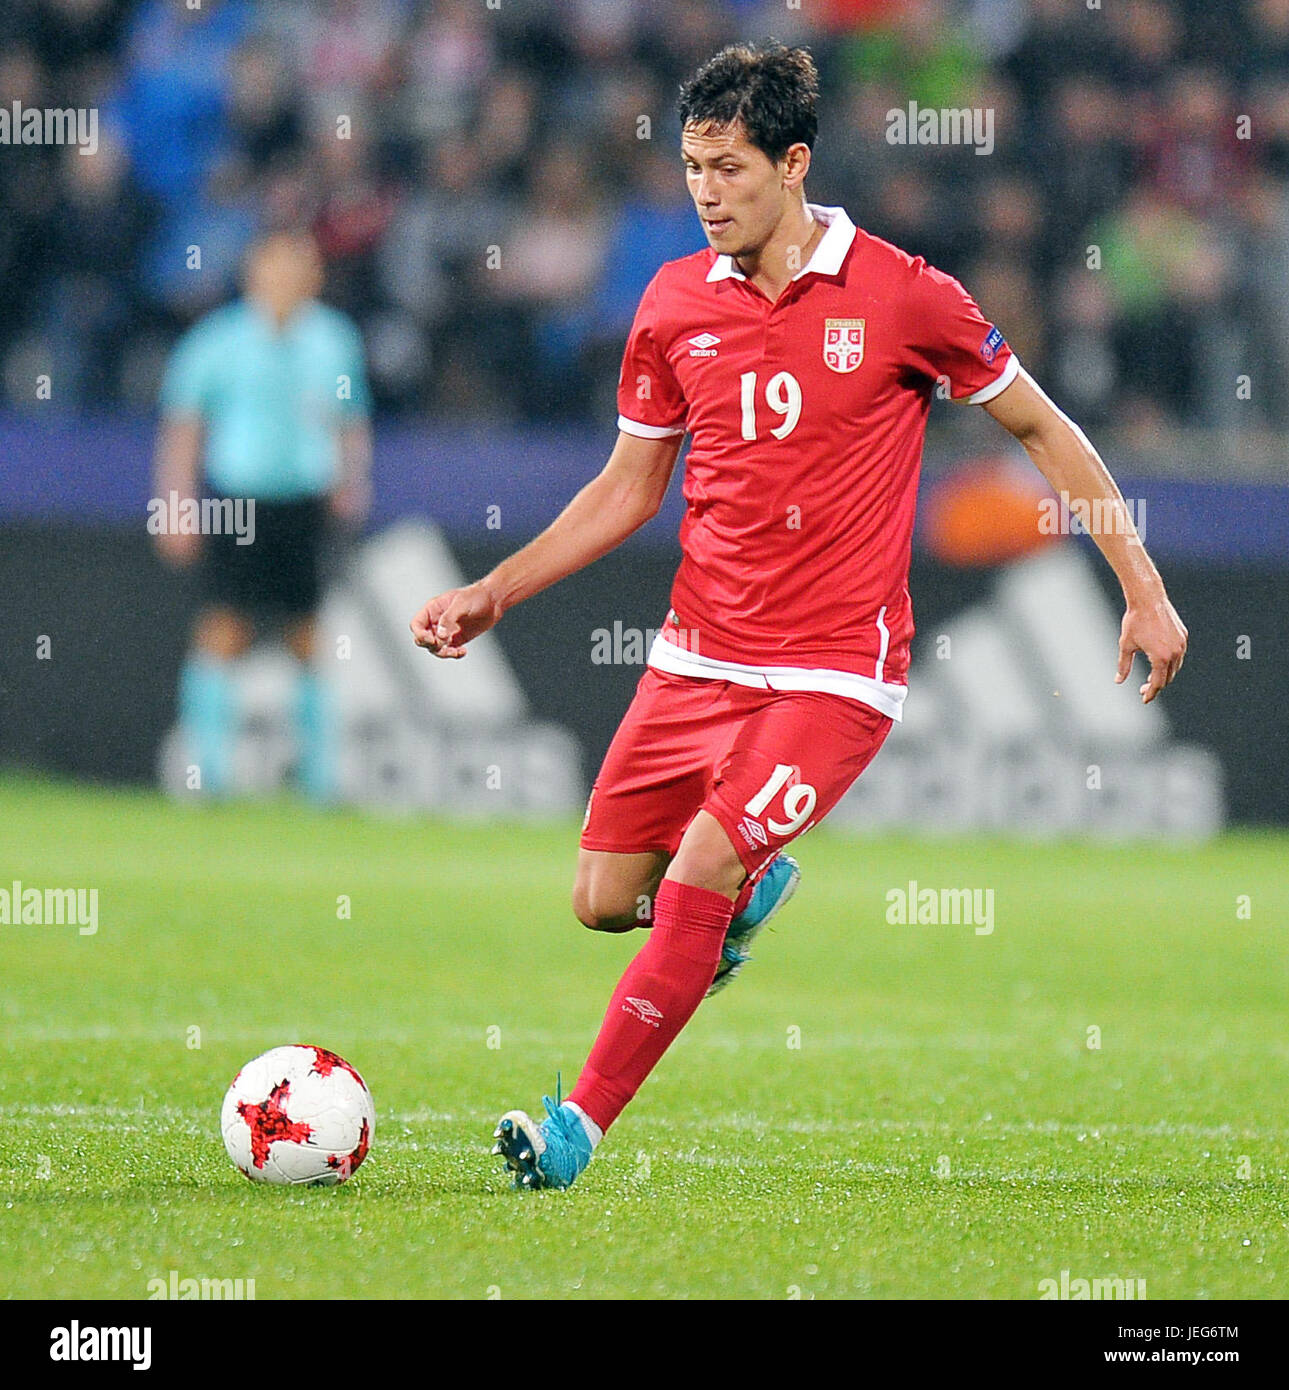 Sasa Lukic during the UEFA European Under-21 match between Serbia and Spain at Arena Bydgoszcz on June 23, 2017 in Bydgoszcz, Poland. (Photo by MB Media) Stock Photo